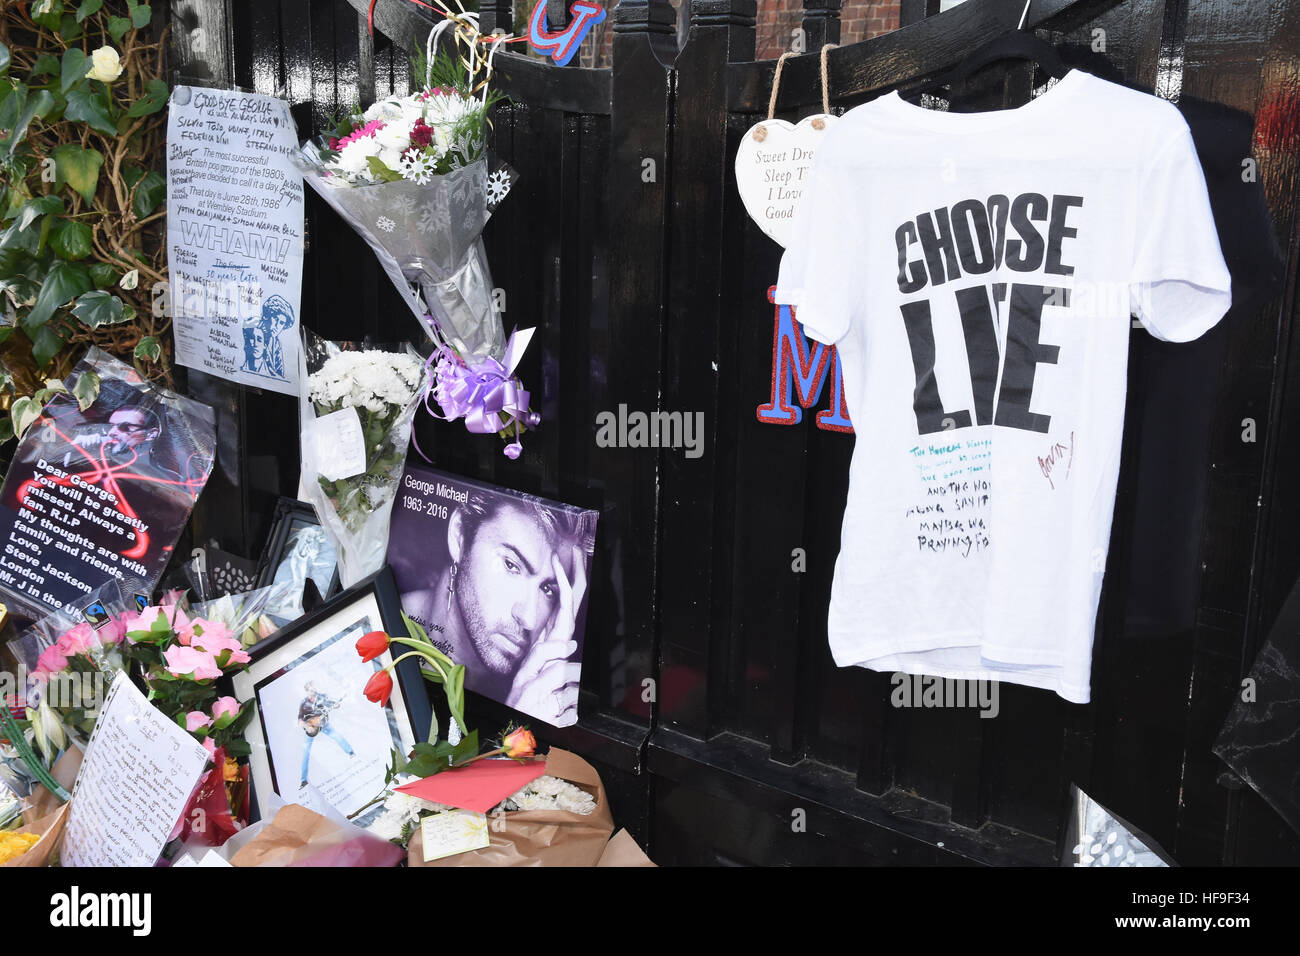 Floral tributes to George Michael placed outside of his London home. Following his death on 25.12.16. The Grove,Highgate,London. Stock Photo